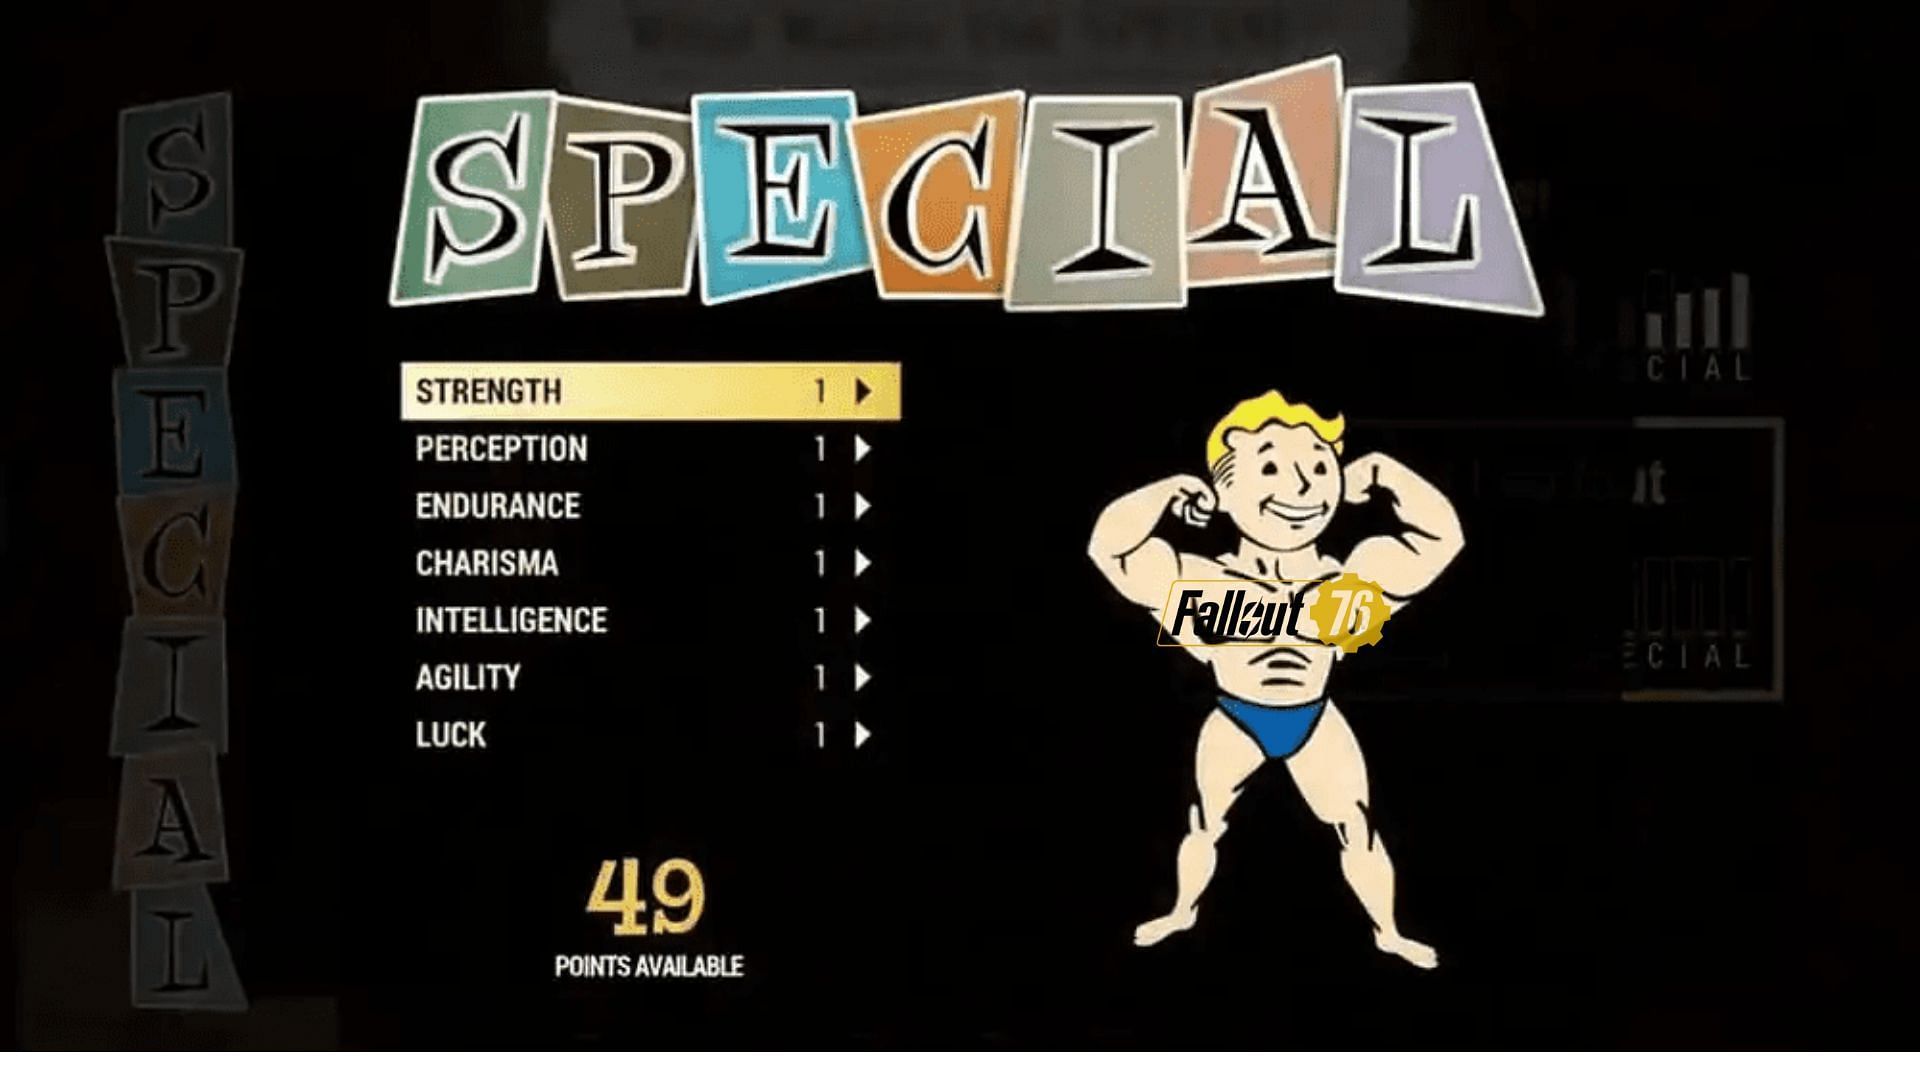 Players can level up their stats for better in-game performance (Image via Bethesda Game Studios)